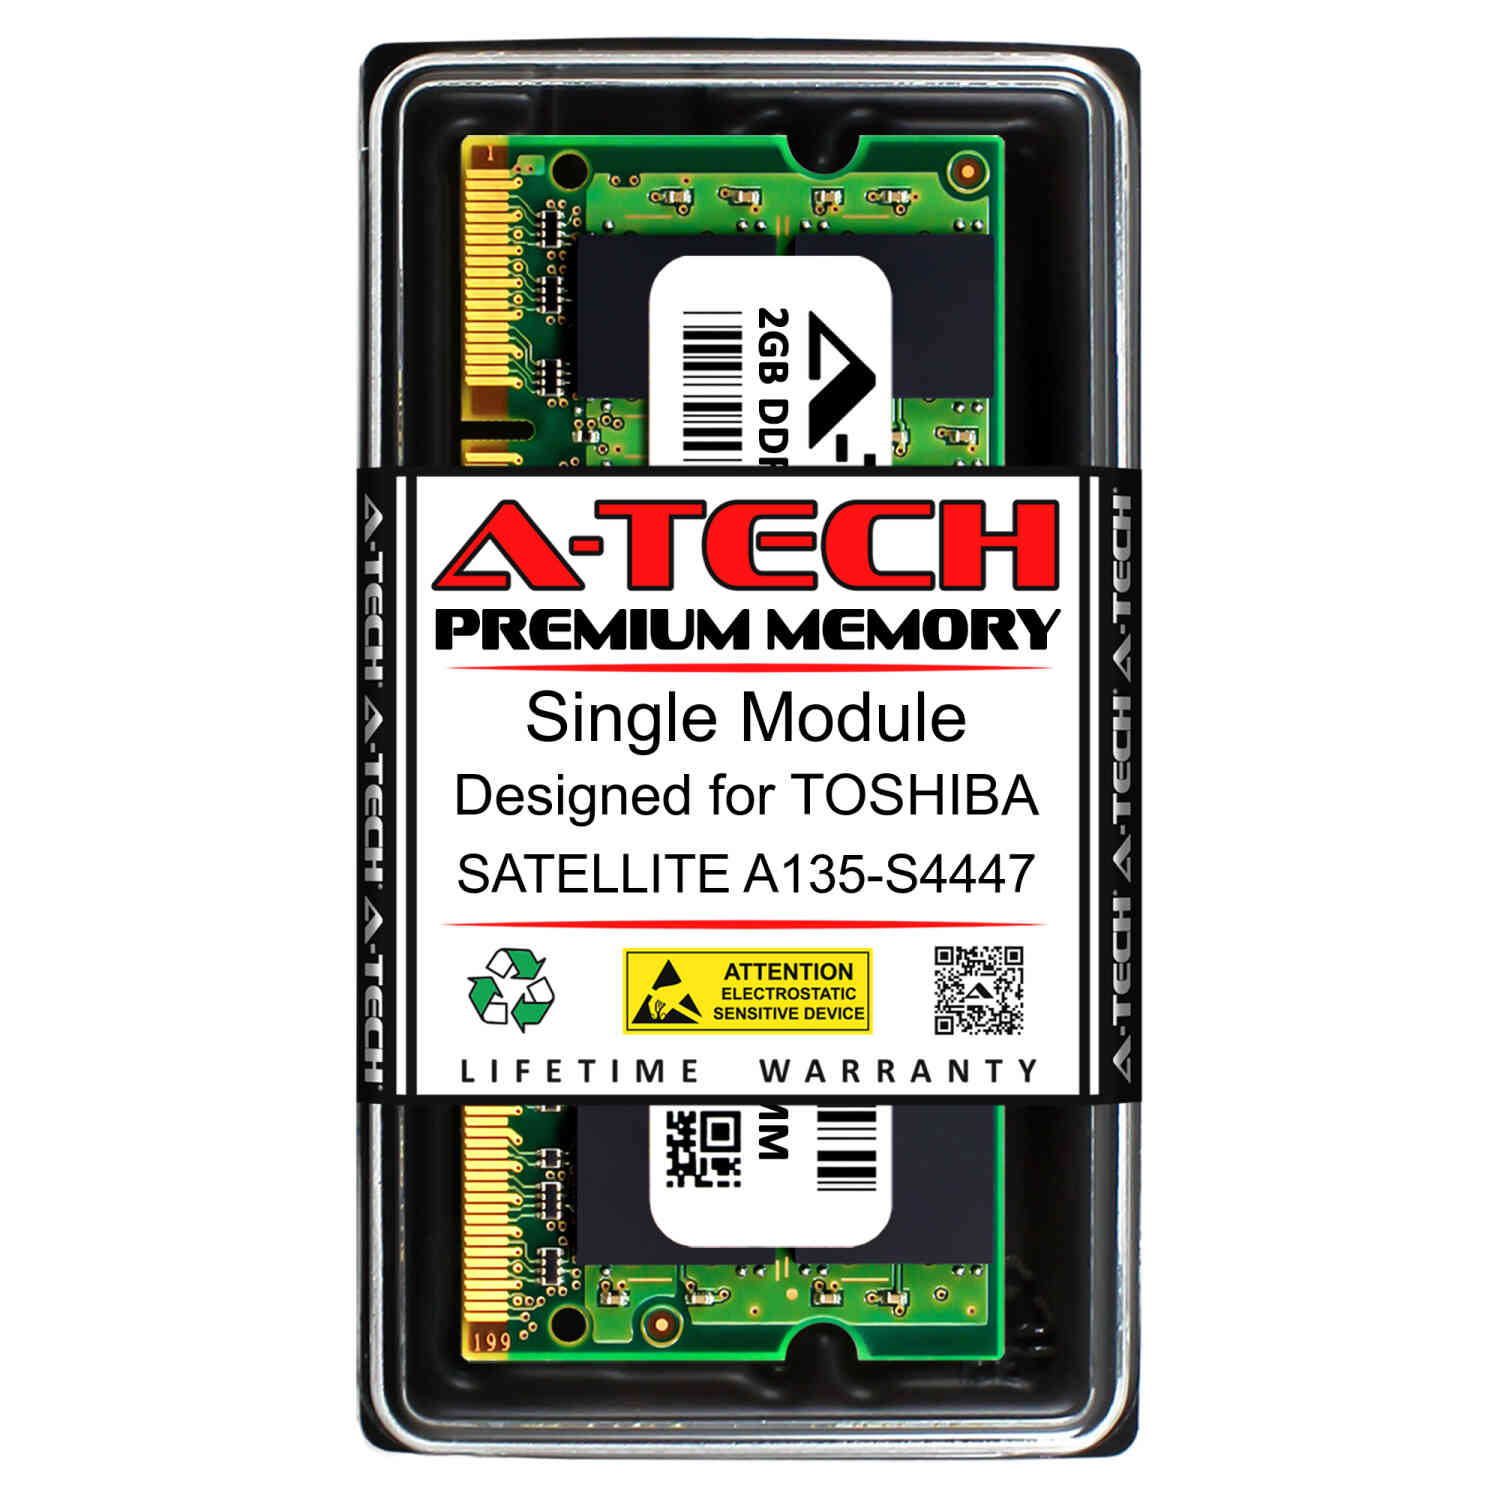 Details about 2GB PC2-5300 DDR2 667 MHz Memory RAM for TOSHIBA SATELLITE  A135-S4447